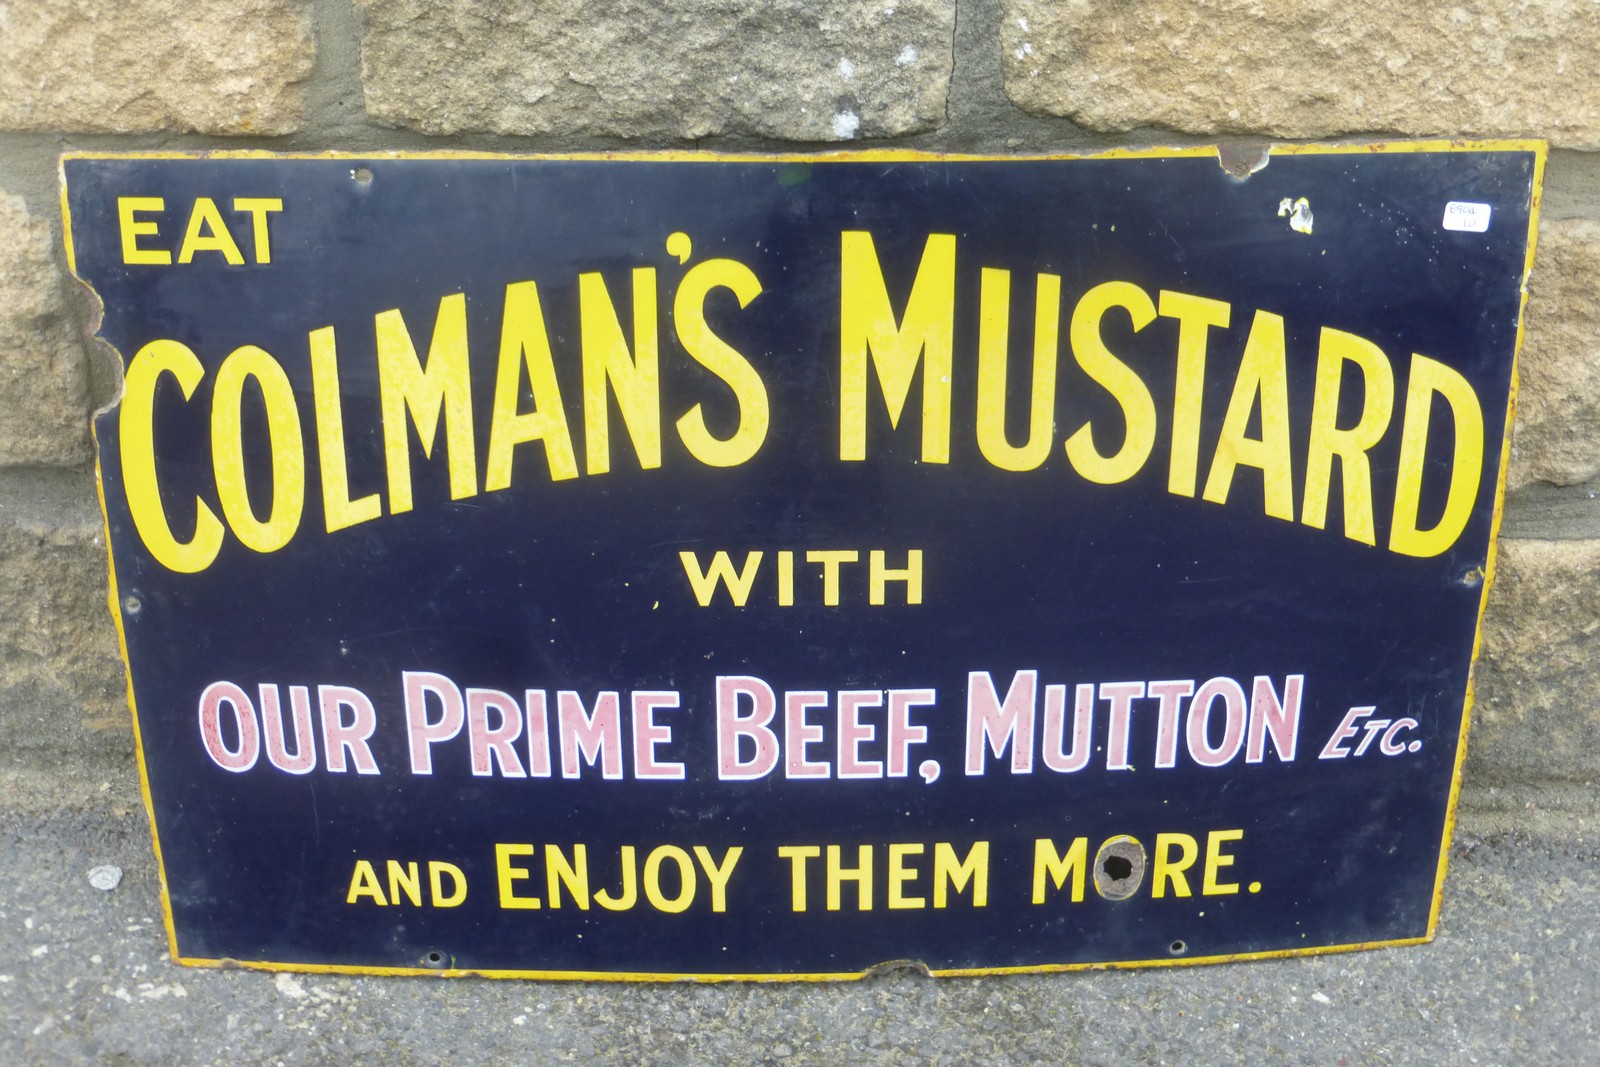 A Colman's Mustard "with our prime beef, mutton etc" rectangular enamel sign, 22 x 14".